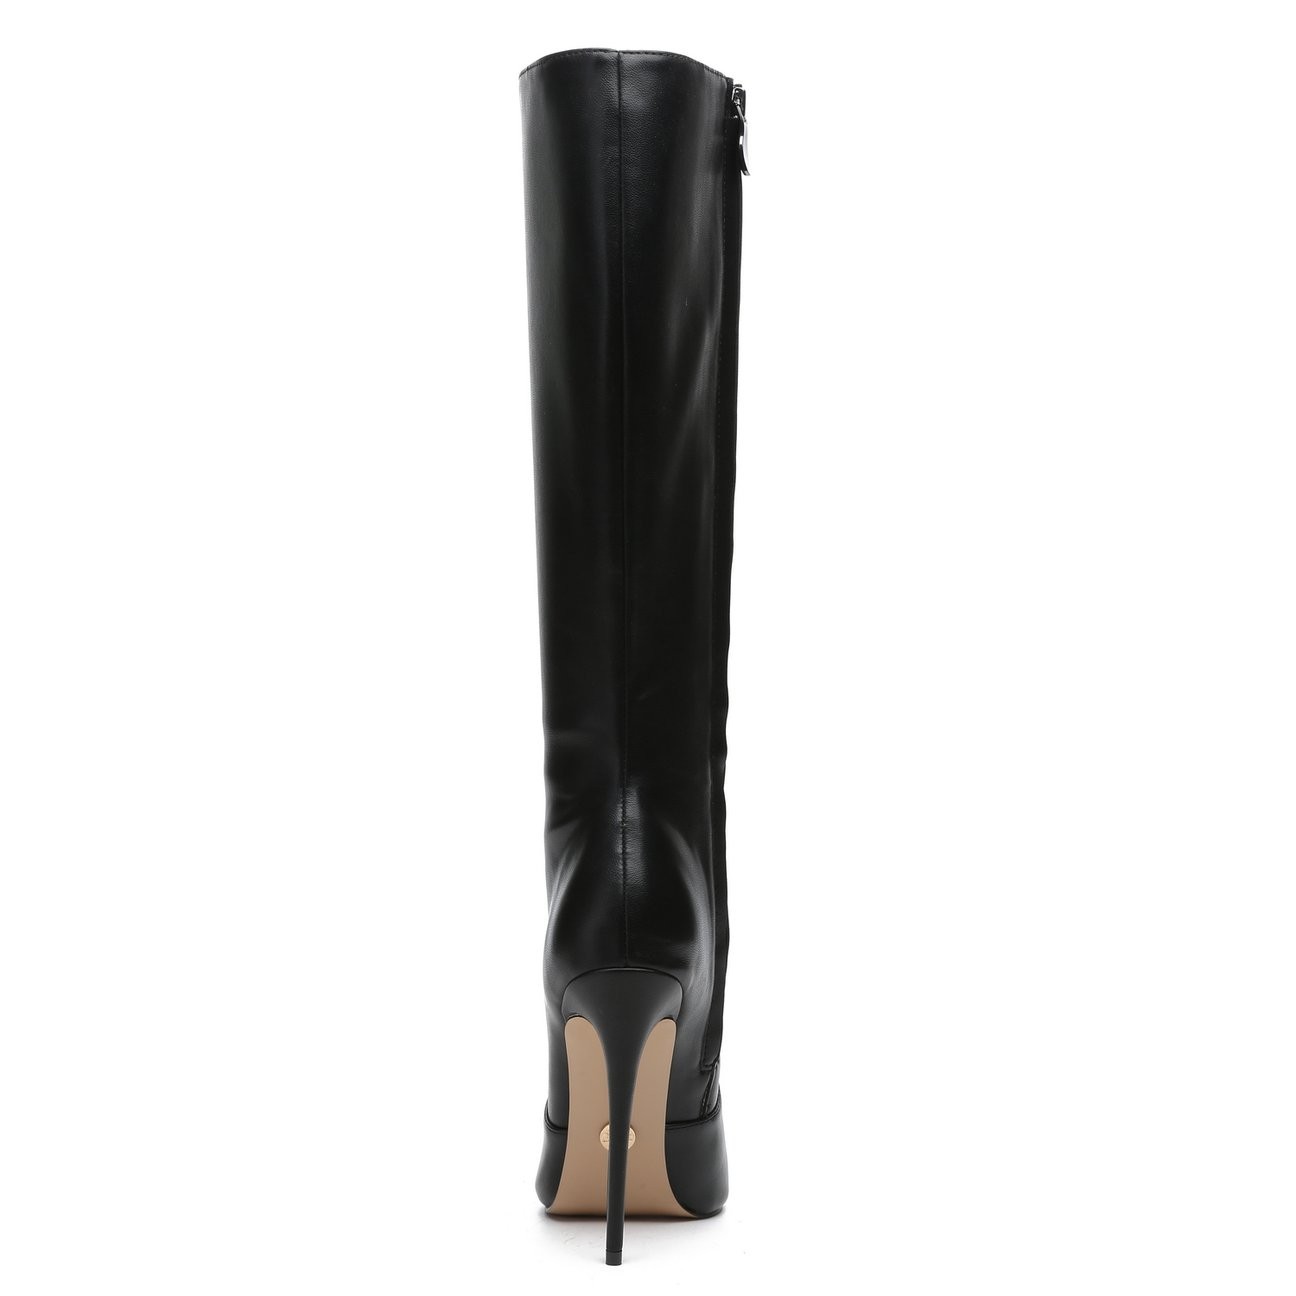 Details about   Womens Patent Leather High Knee Boots Pointy Toe Stiletto Side Zipper Shoes Chic 